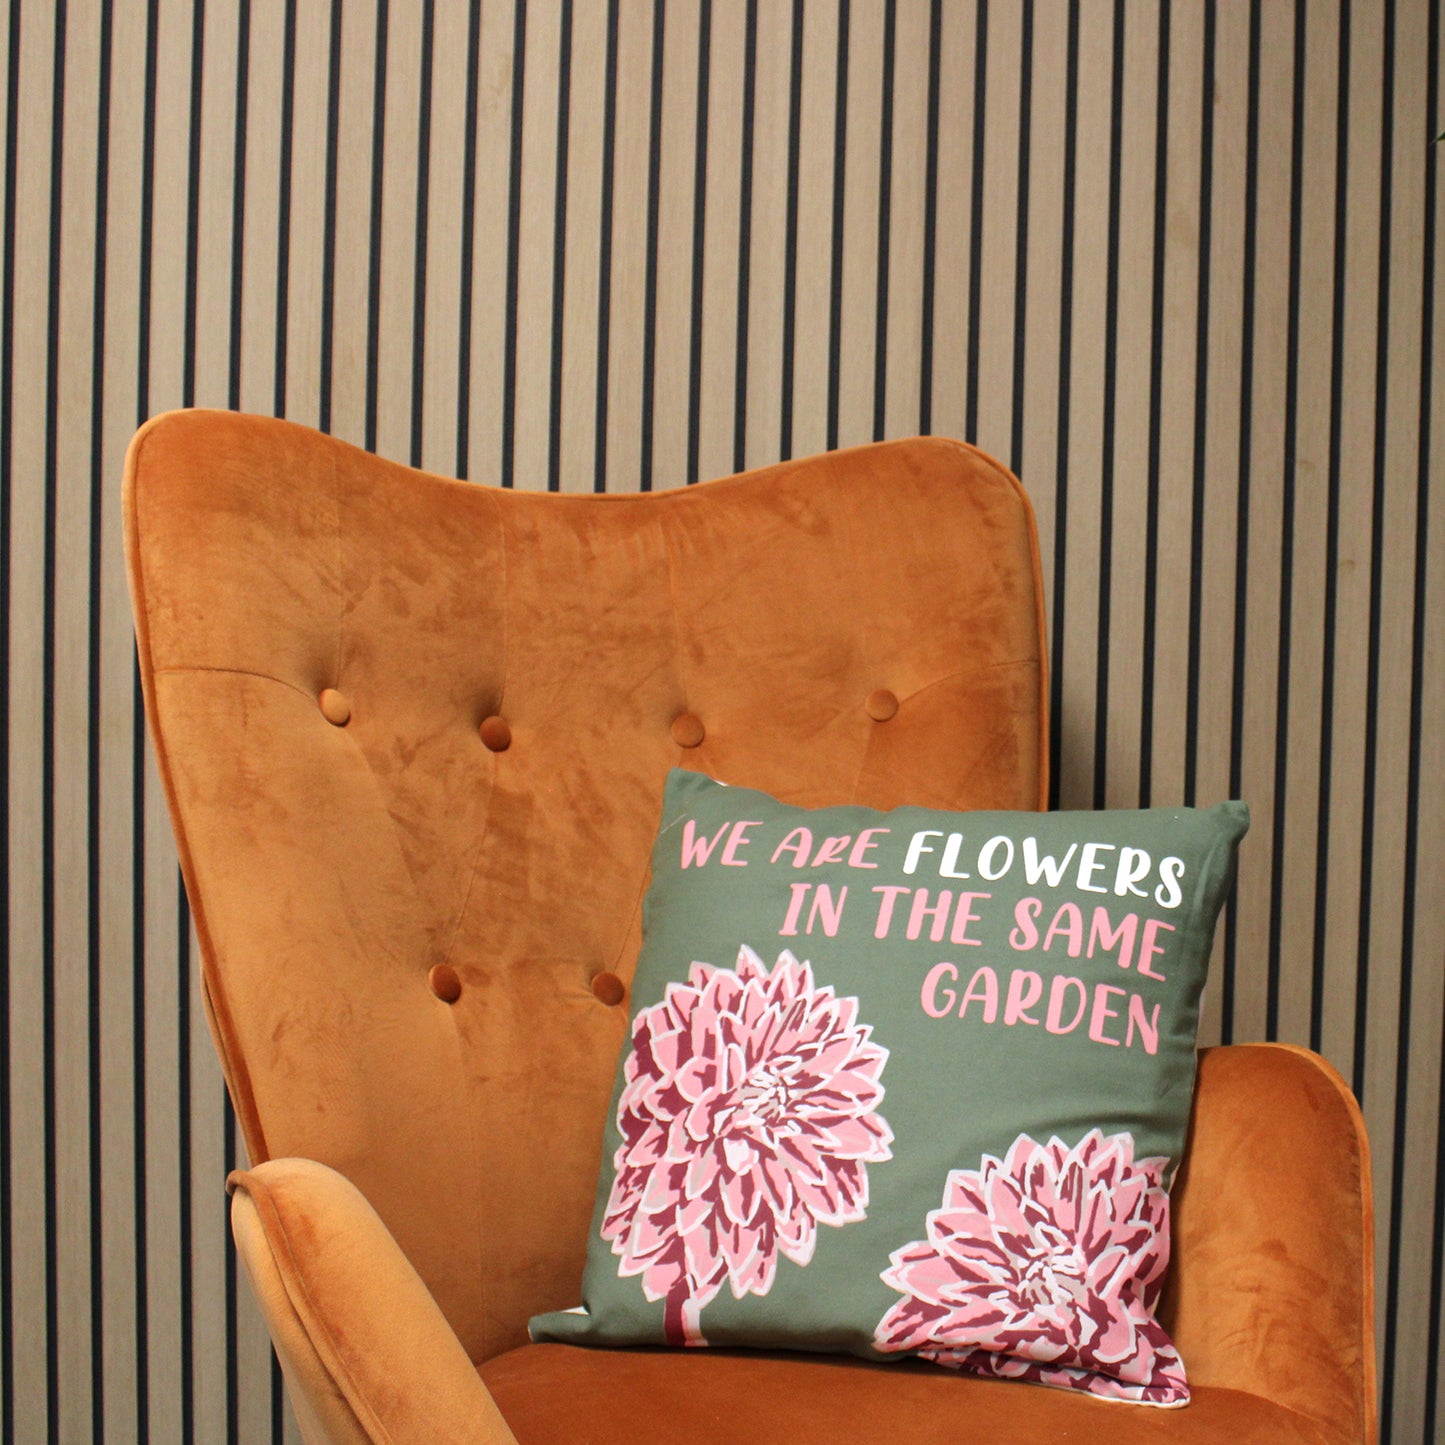 Printed Cotton Cushion Cover - We are Flowers - Olive, Pink and Natural